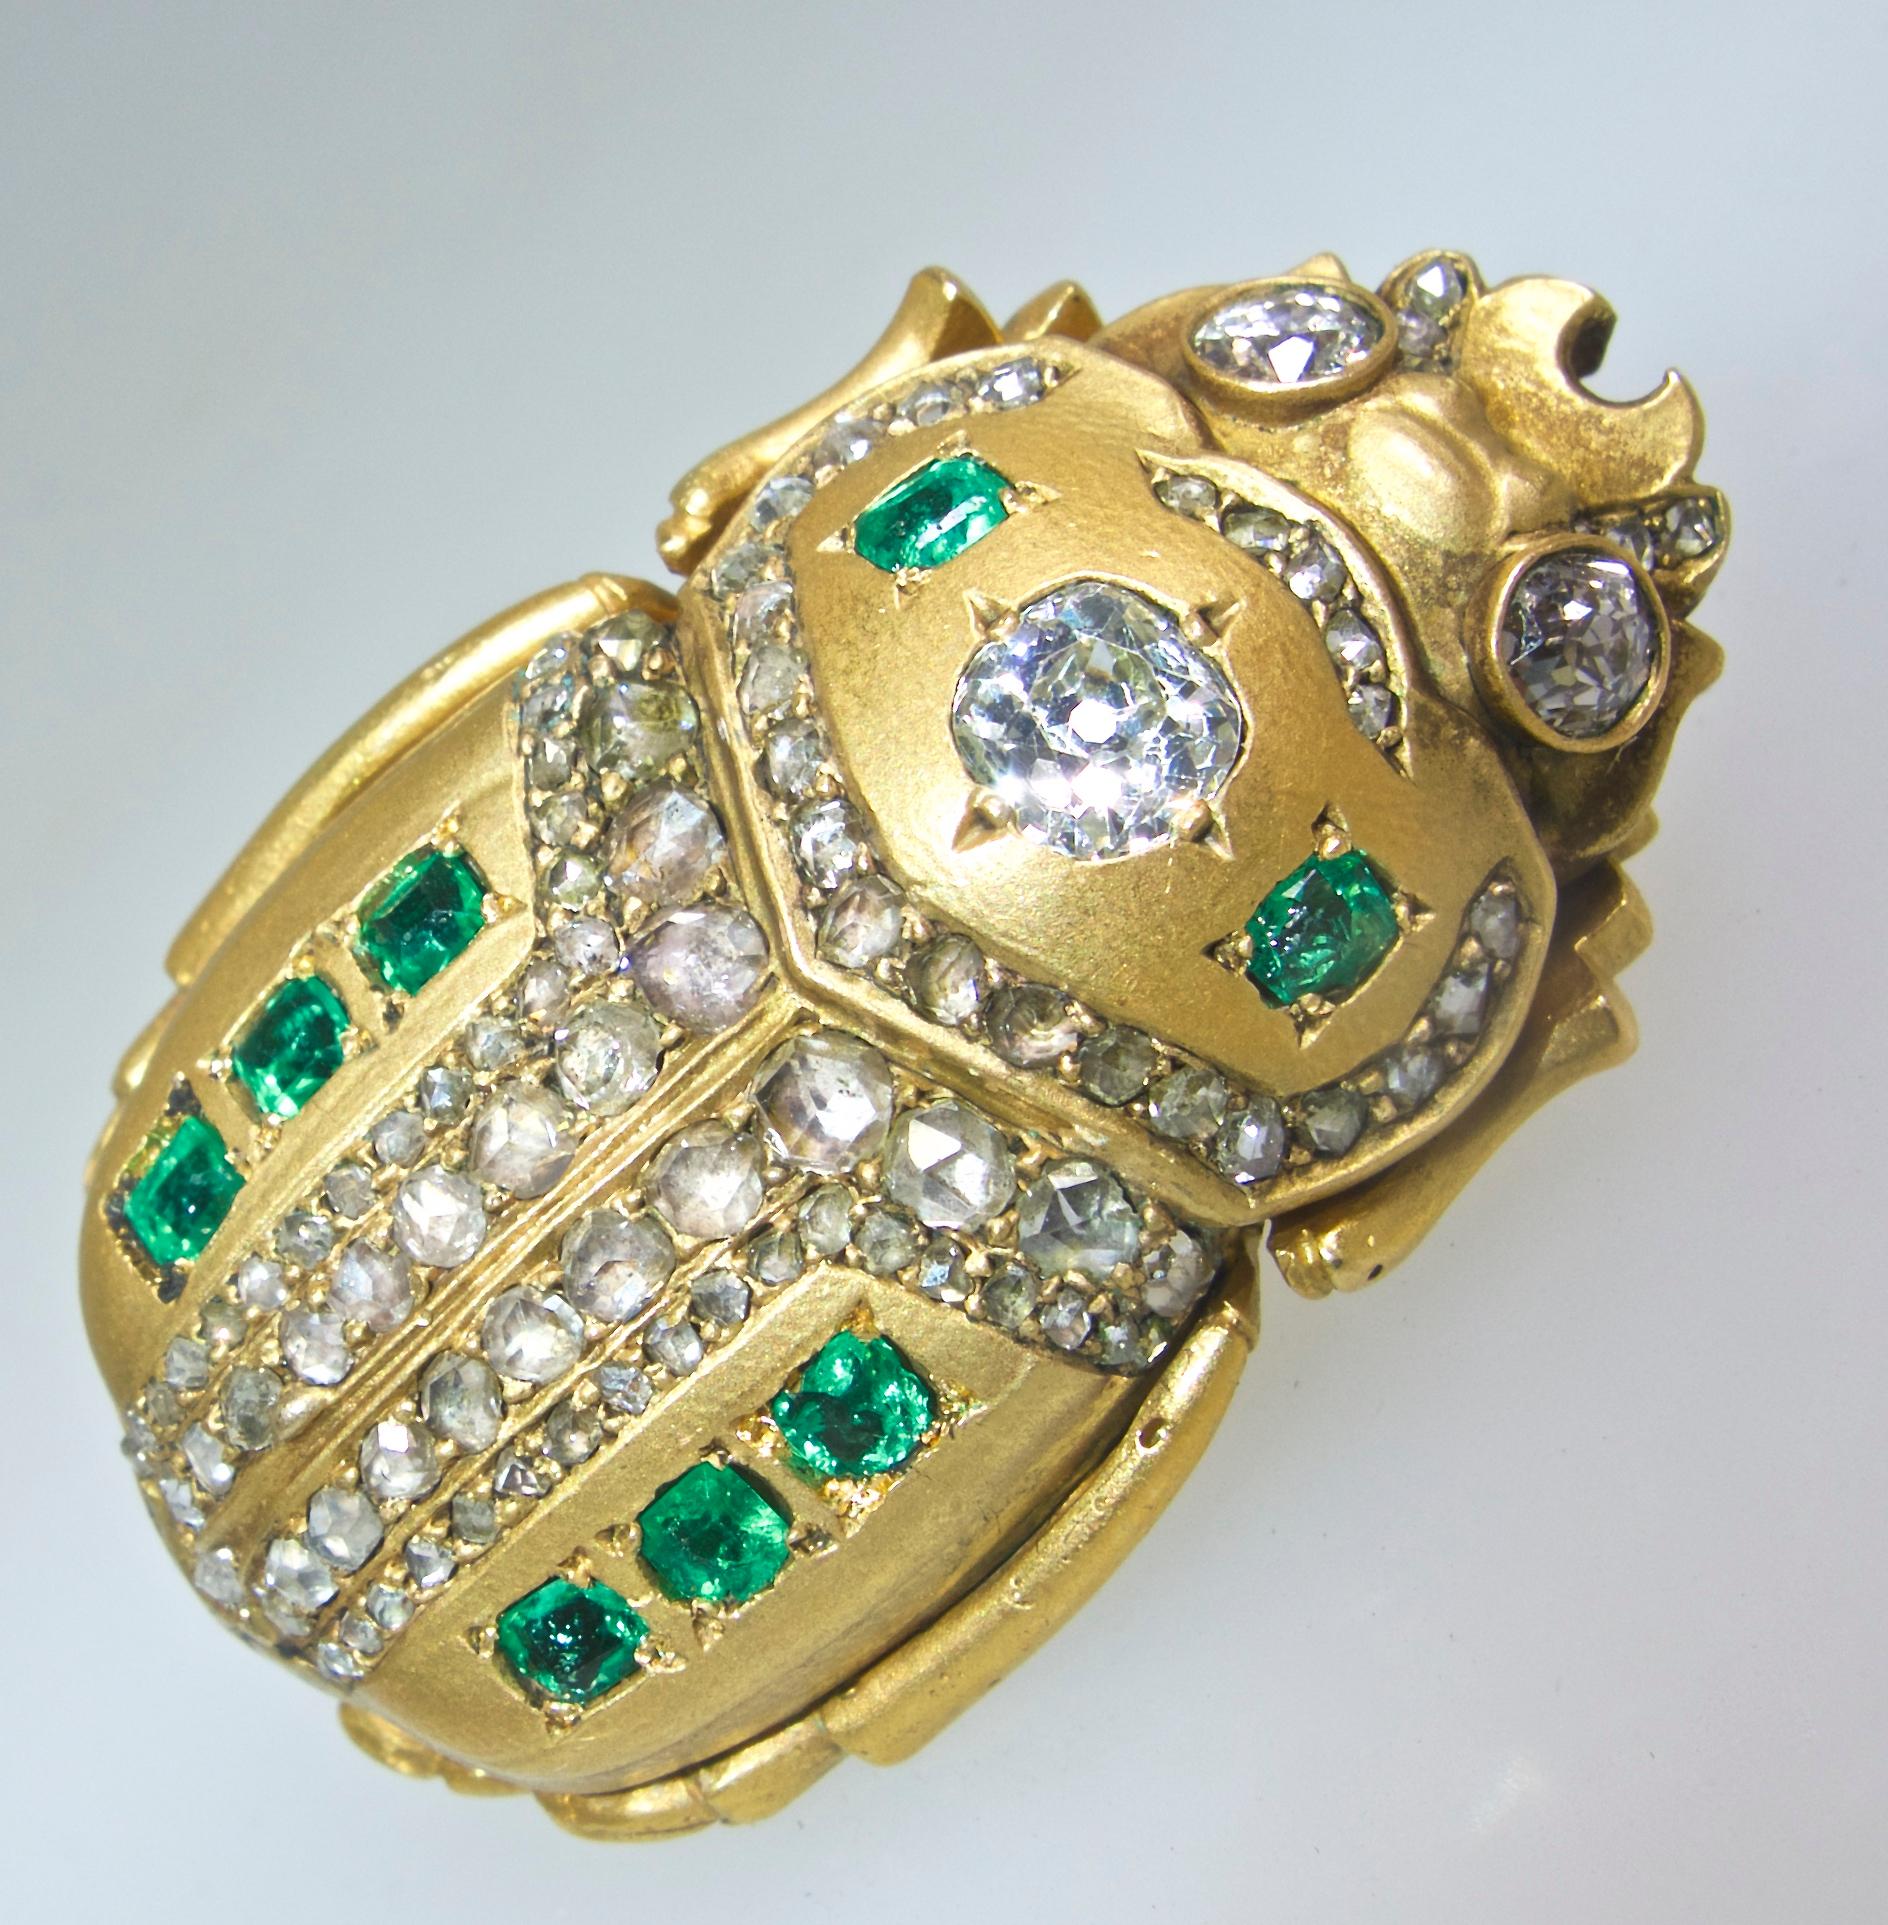 Victorian Antique Scarab Brooch with Emeralds and Diamonds, French, circa 1860